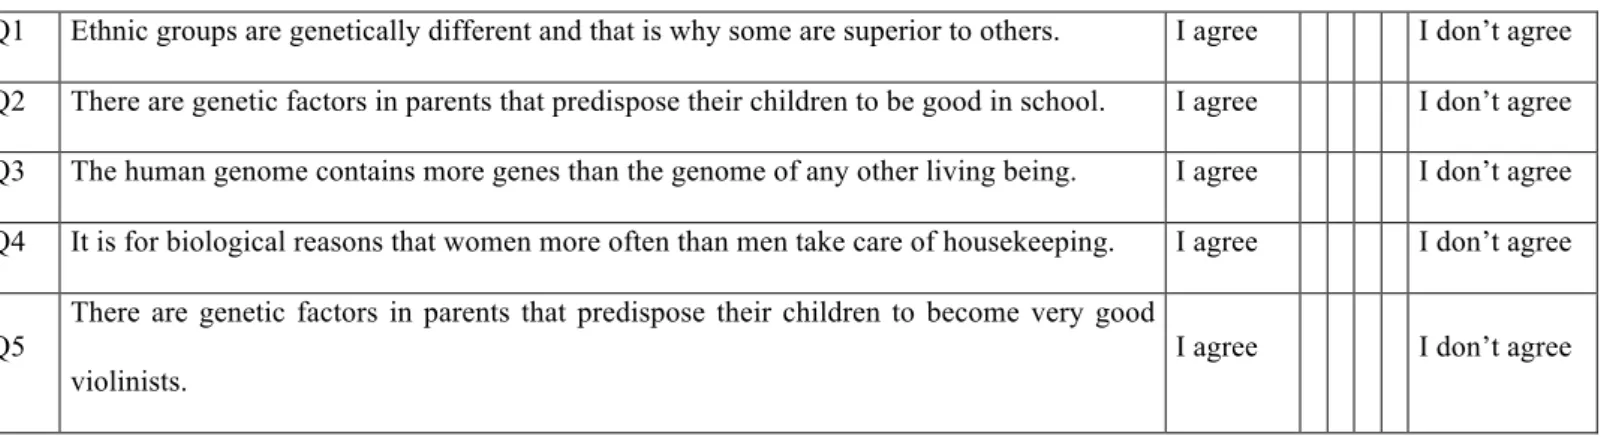 Table I: Five questions related to genetics and determinism of some human features. 